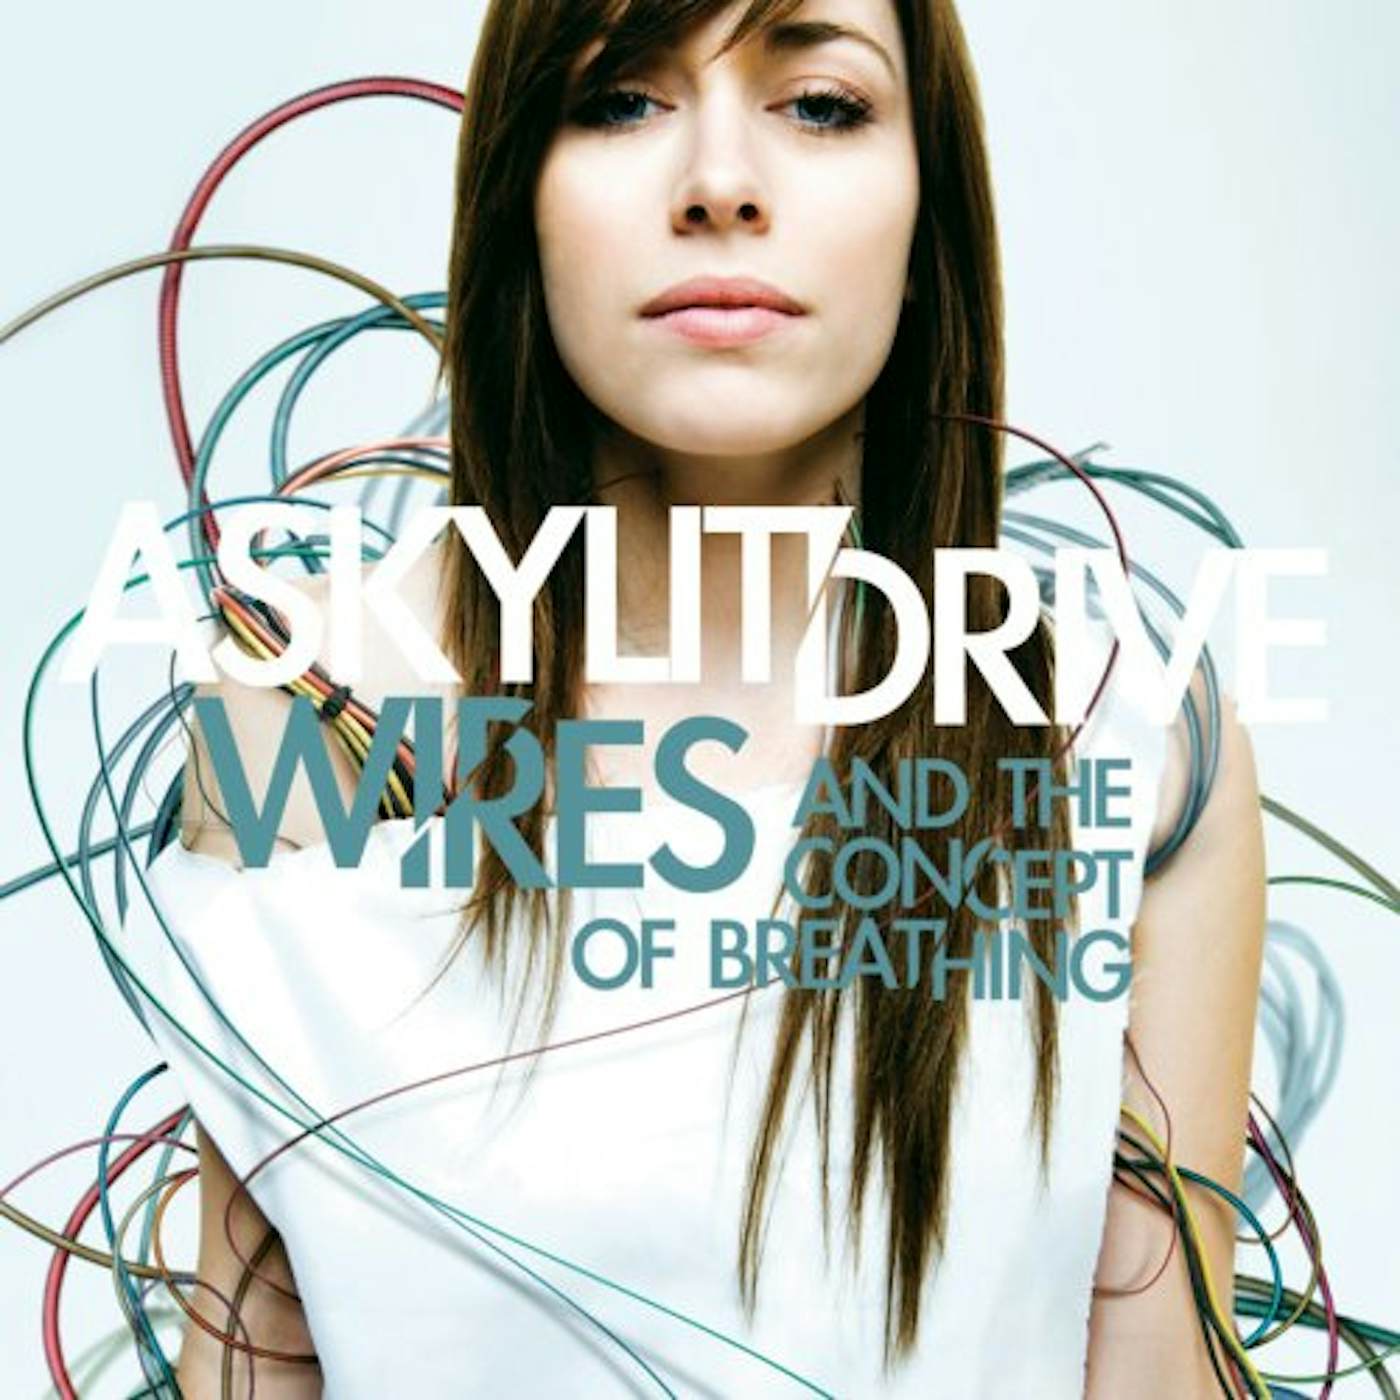 A Skylit Drive WIRES & THE CONCEPT OF BREATHING CD